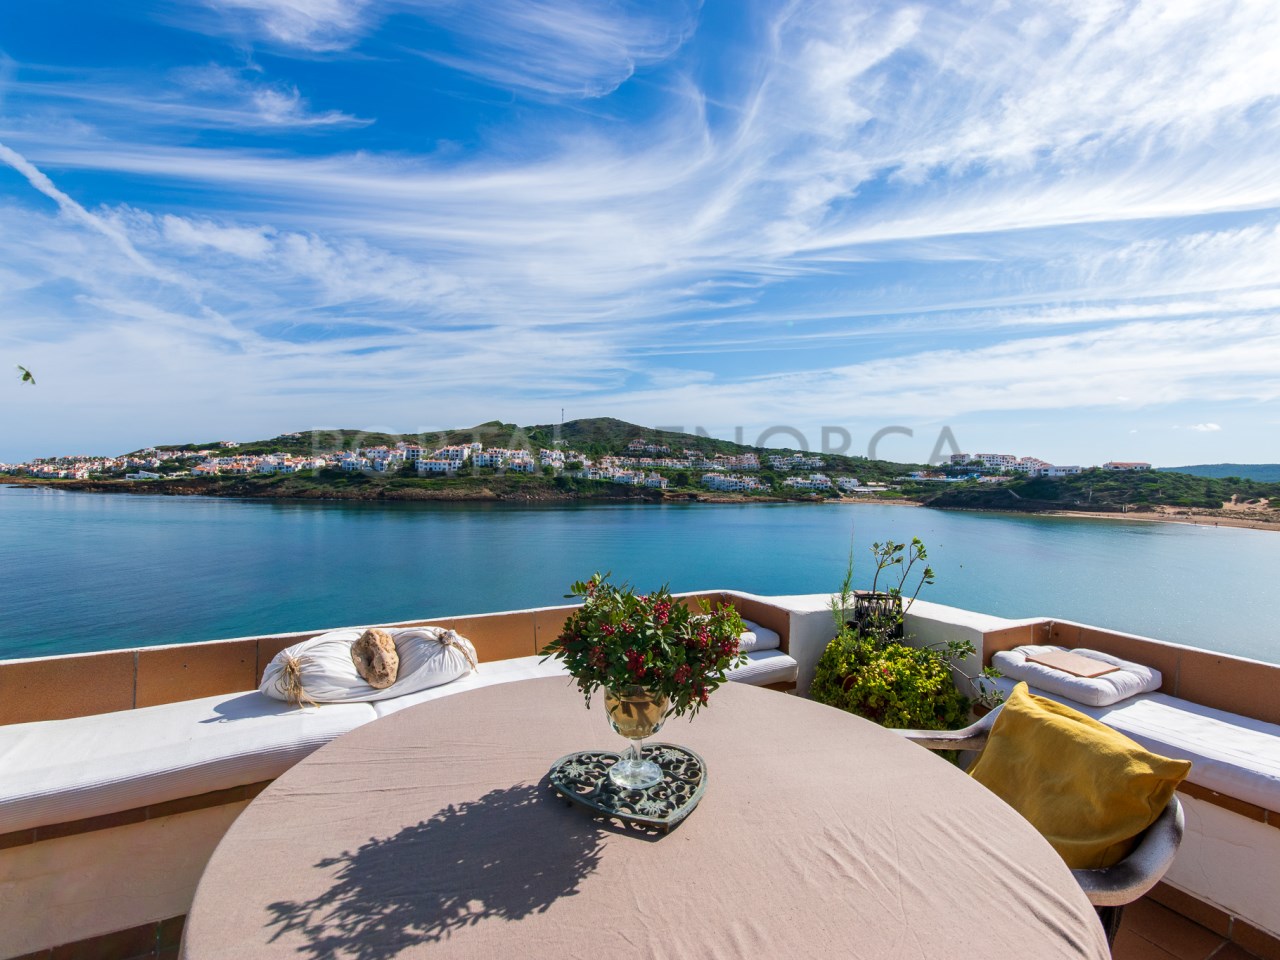 Sea views in 3 bedroom apartment with magnificent views of Cala Tirant and Fornells Beaches